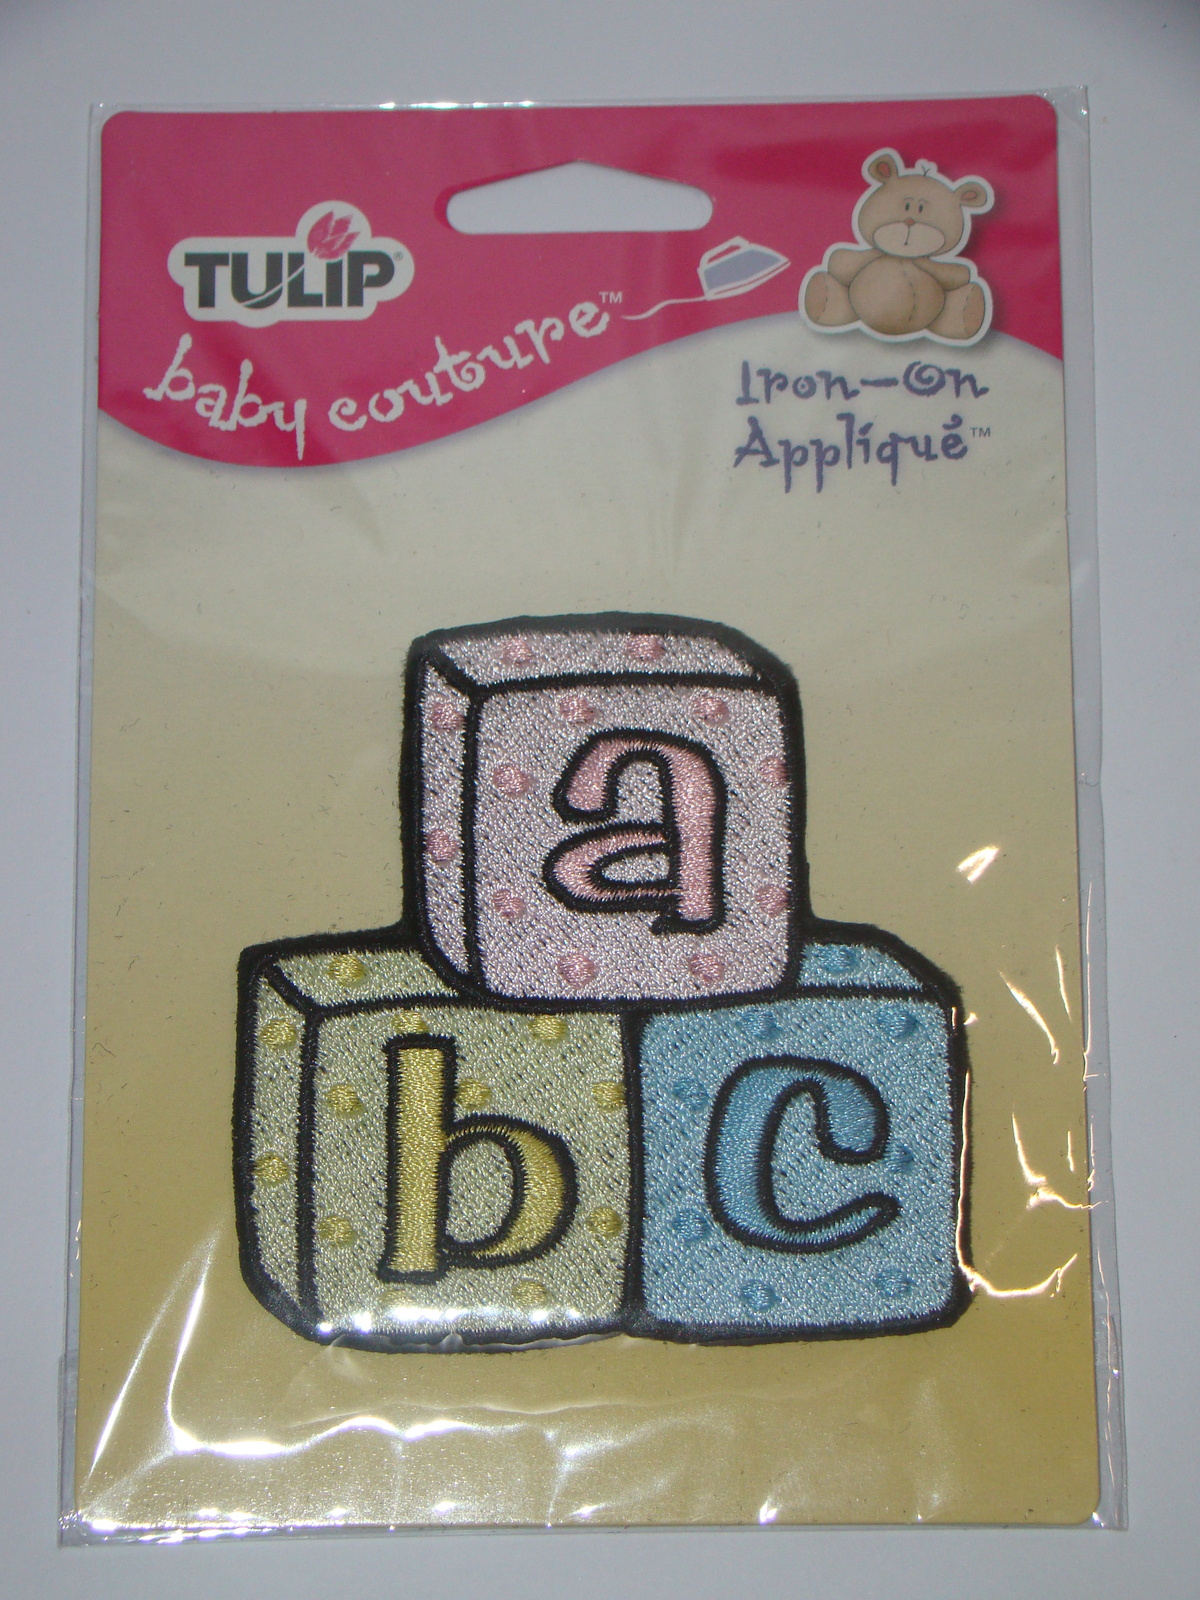 Primary image for TULIP - baby couture Iron-on Applique - ABC Blocks